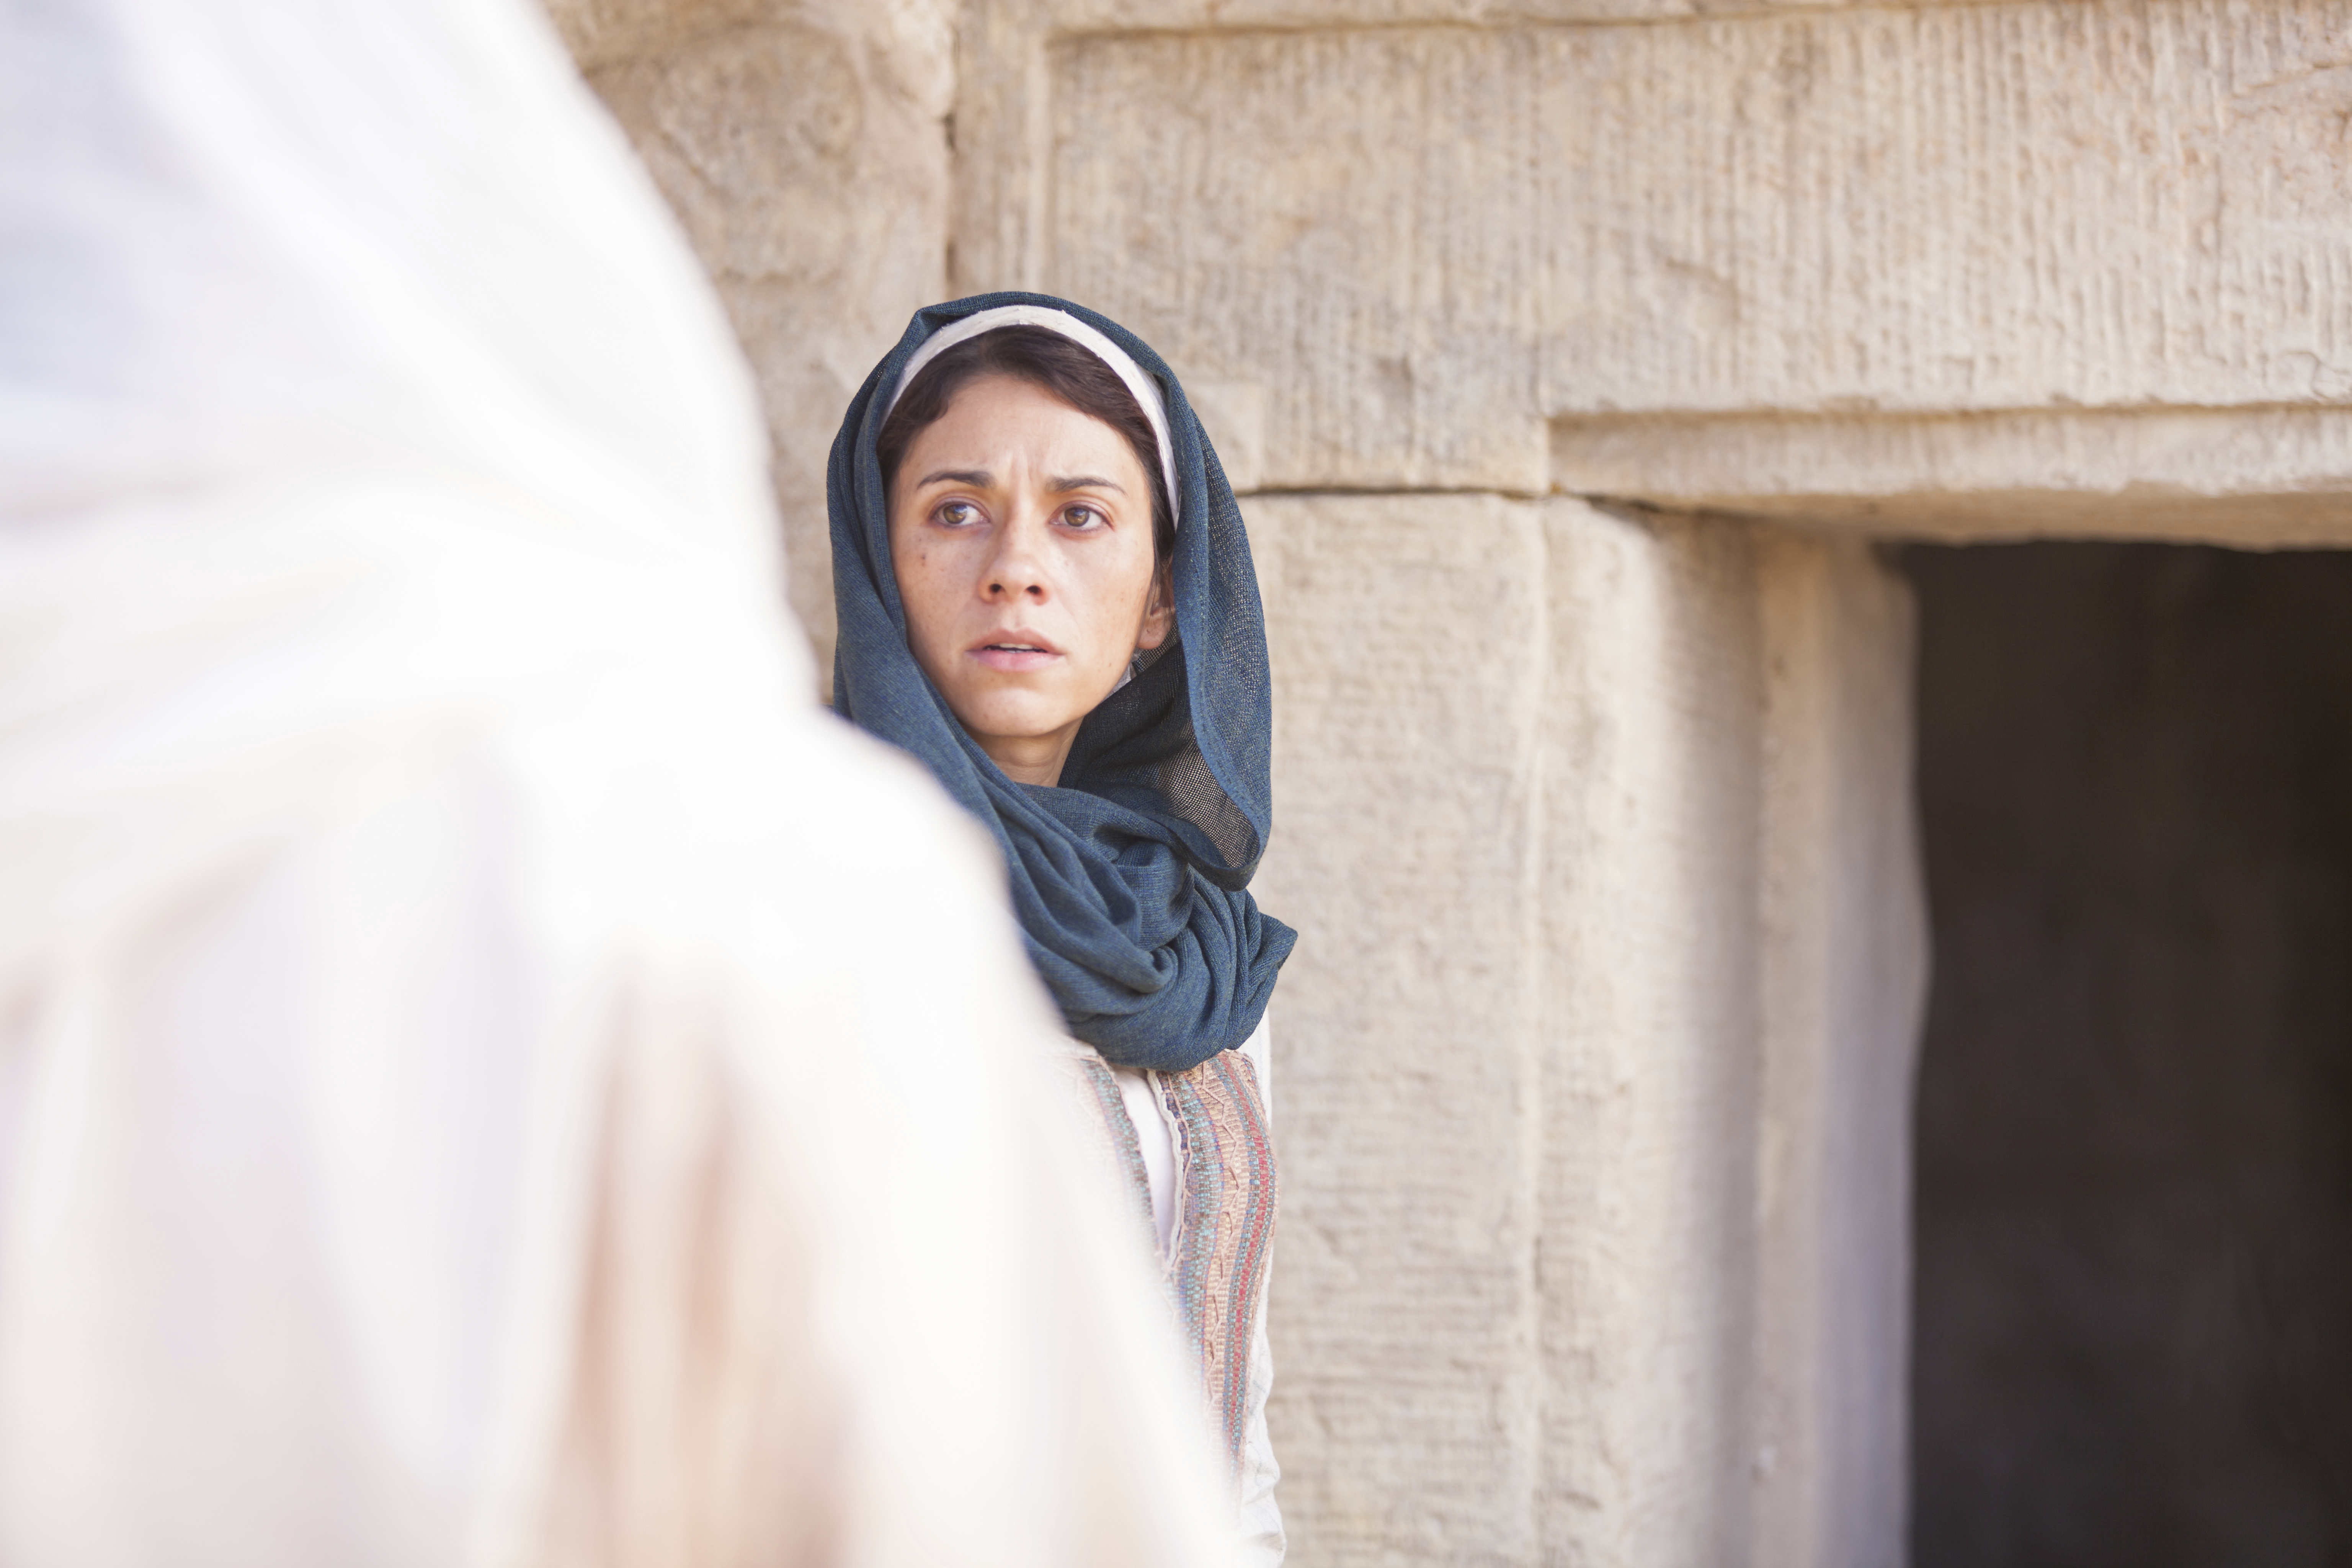 Mary Magdalene encountering the resurrected Christ at the empty tomb.